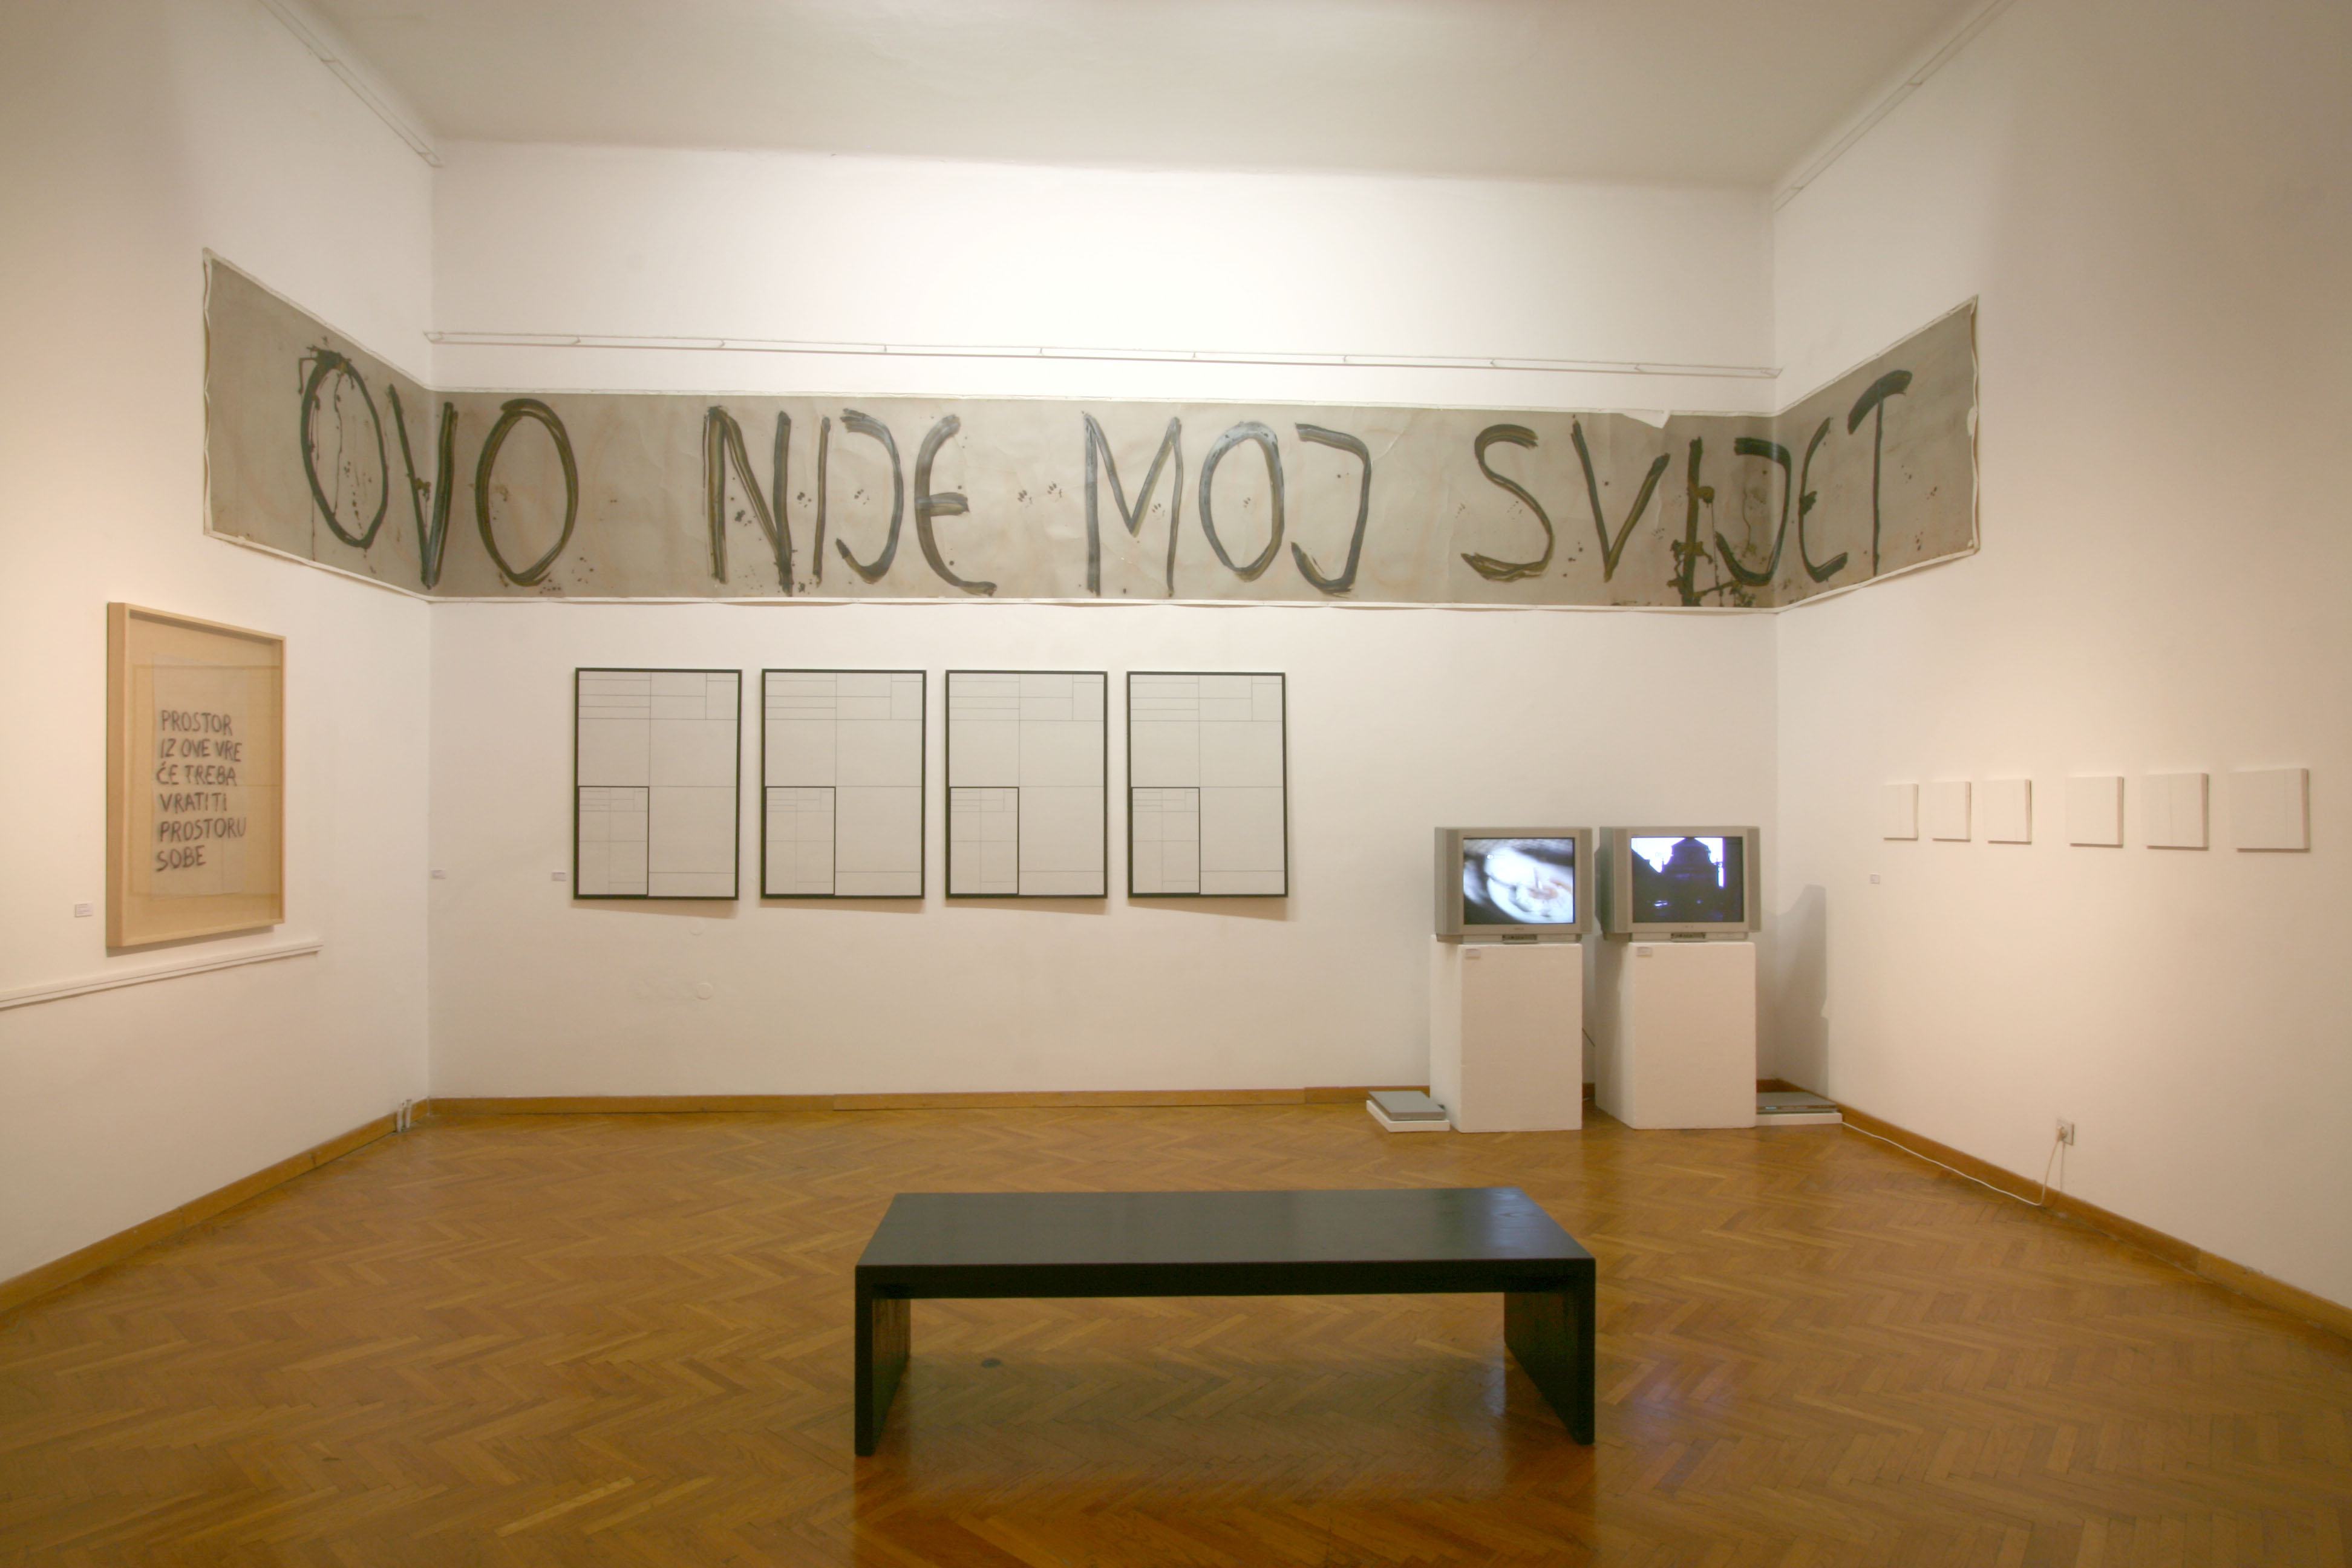 Exhibition in Rijeka in 2007 in the Museum of Modern and Contemporary Art